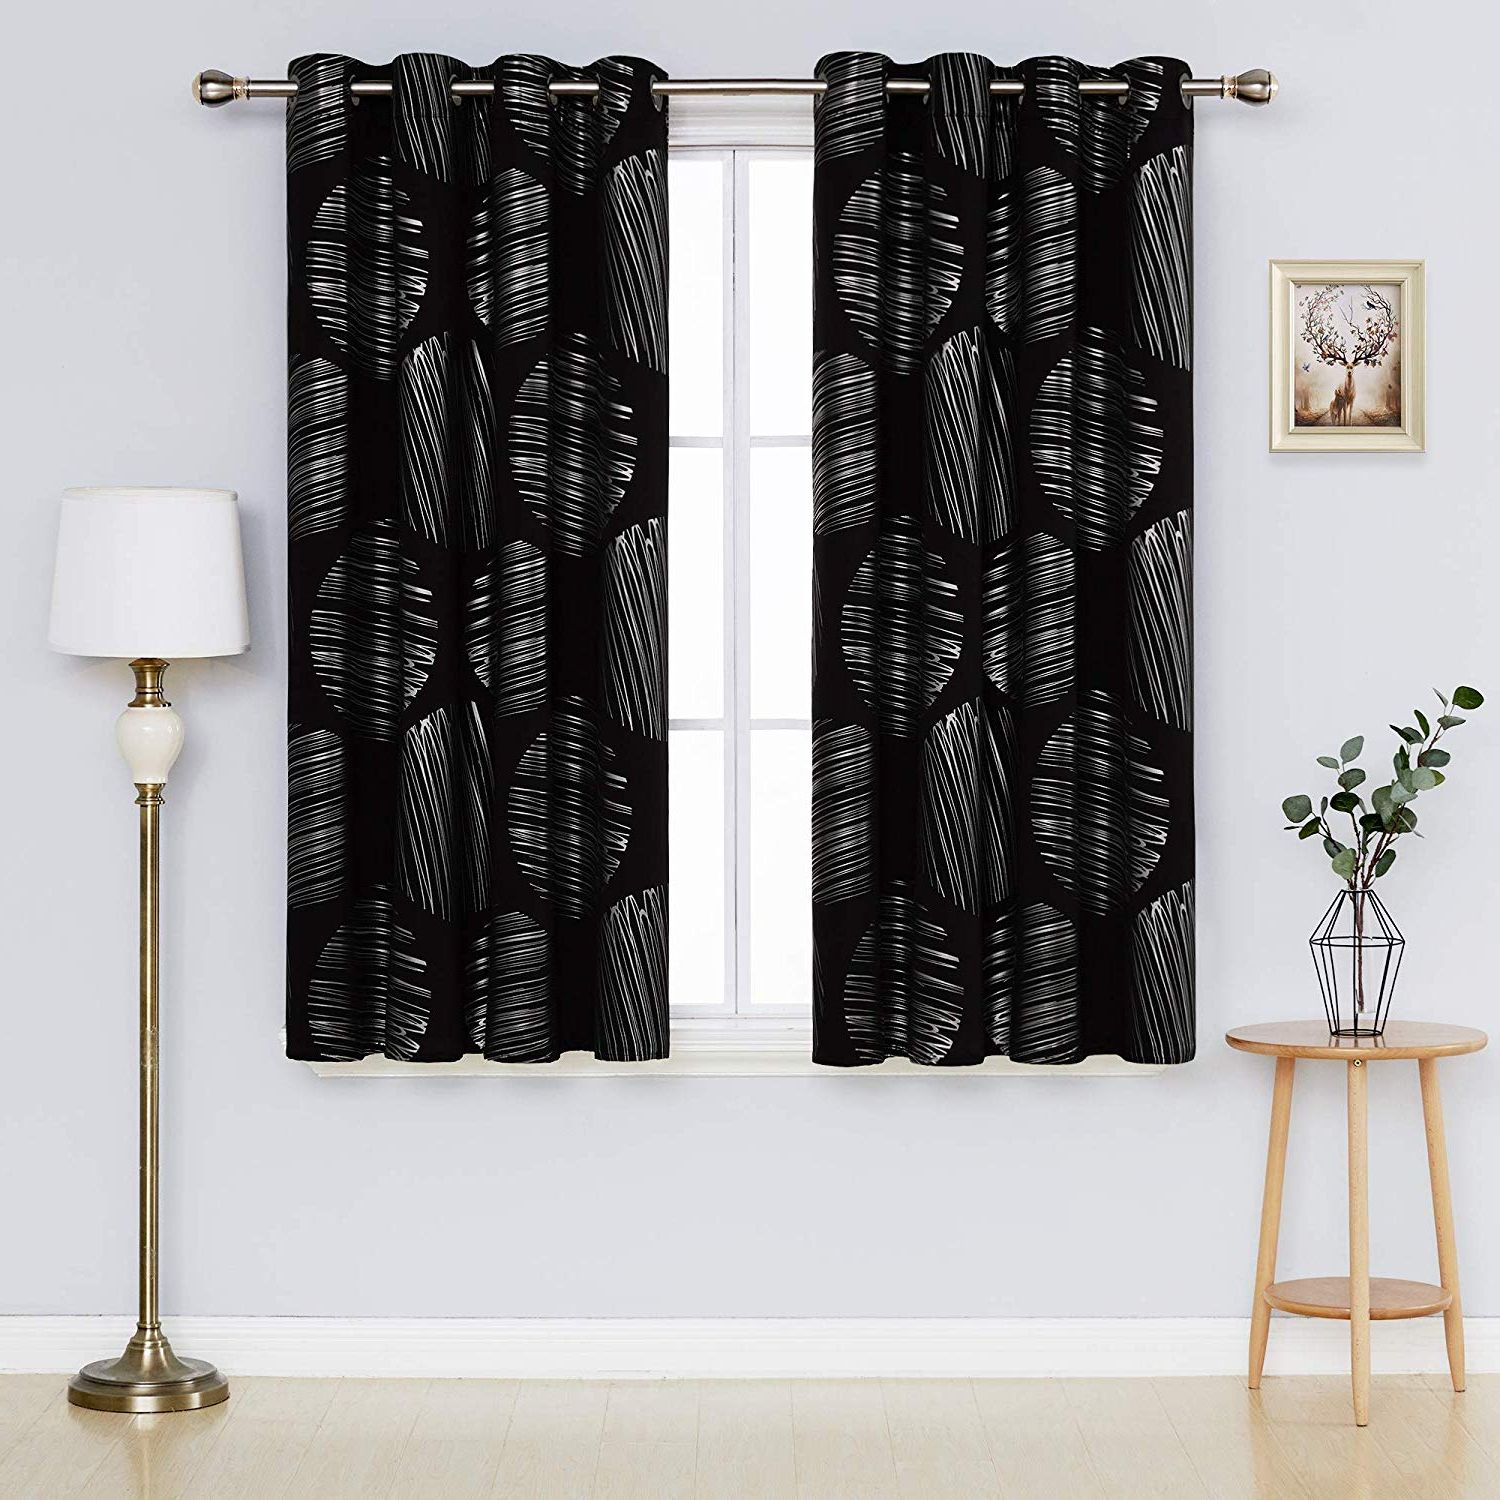 Deconovo Thermal Insulated Curtains Abstract Pattern Foil Printed Window  Blackout Grommet Curtain Panels For Kitchen 52 X 63 Inch Black 2 Panles With Regard To Well Liked Abstract Blackout Curtain Panel Pairs (View 16 of 20)